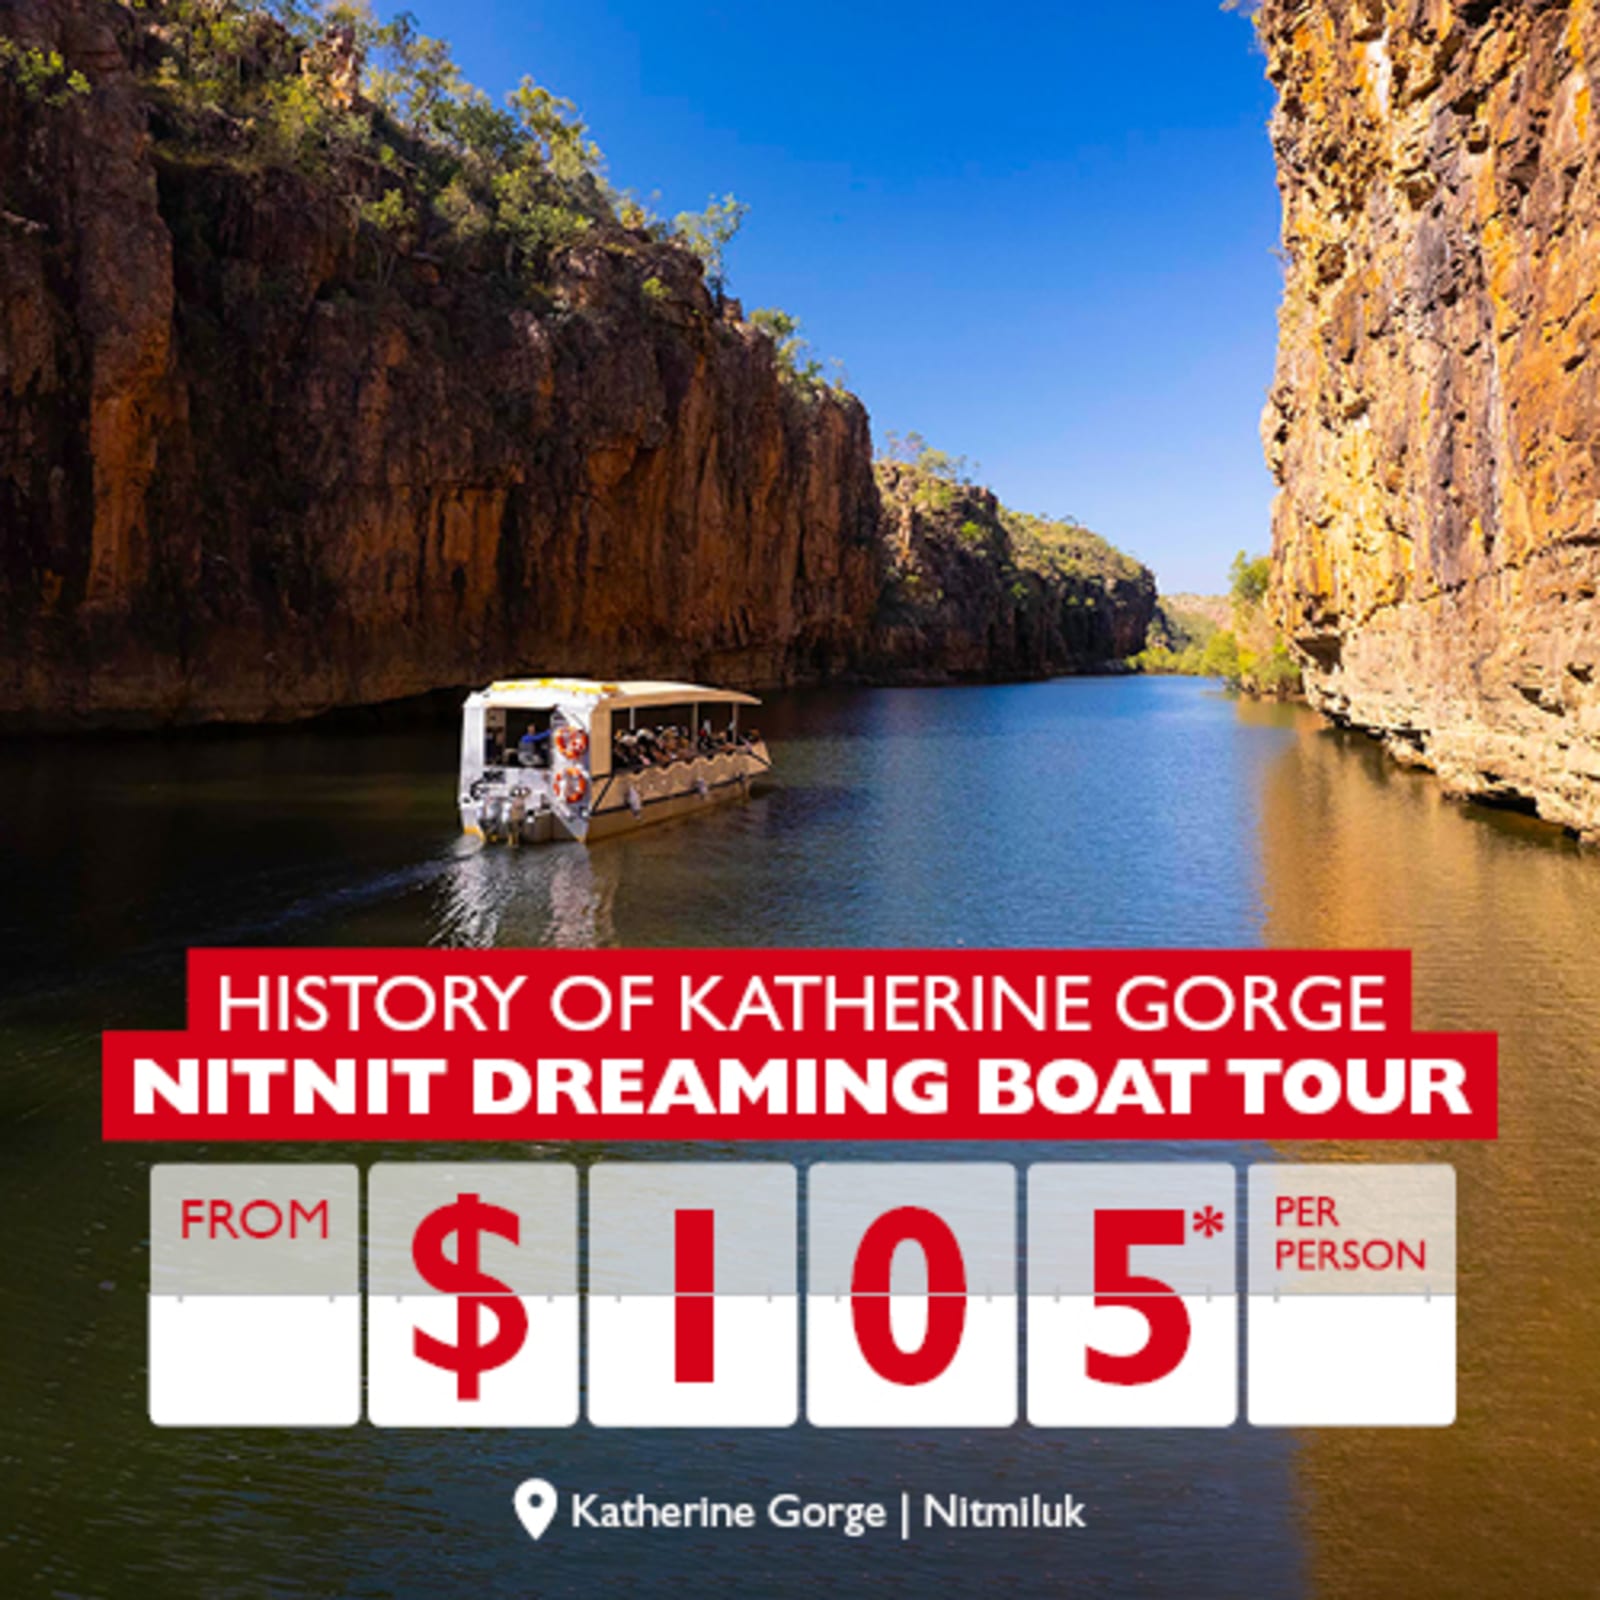 History of Katherine Gorge | Nitnit dreaming boat tour from $105* per person